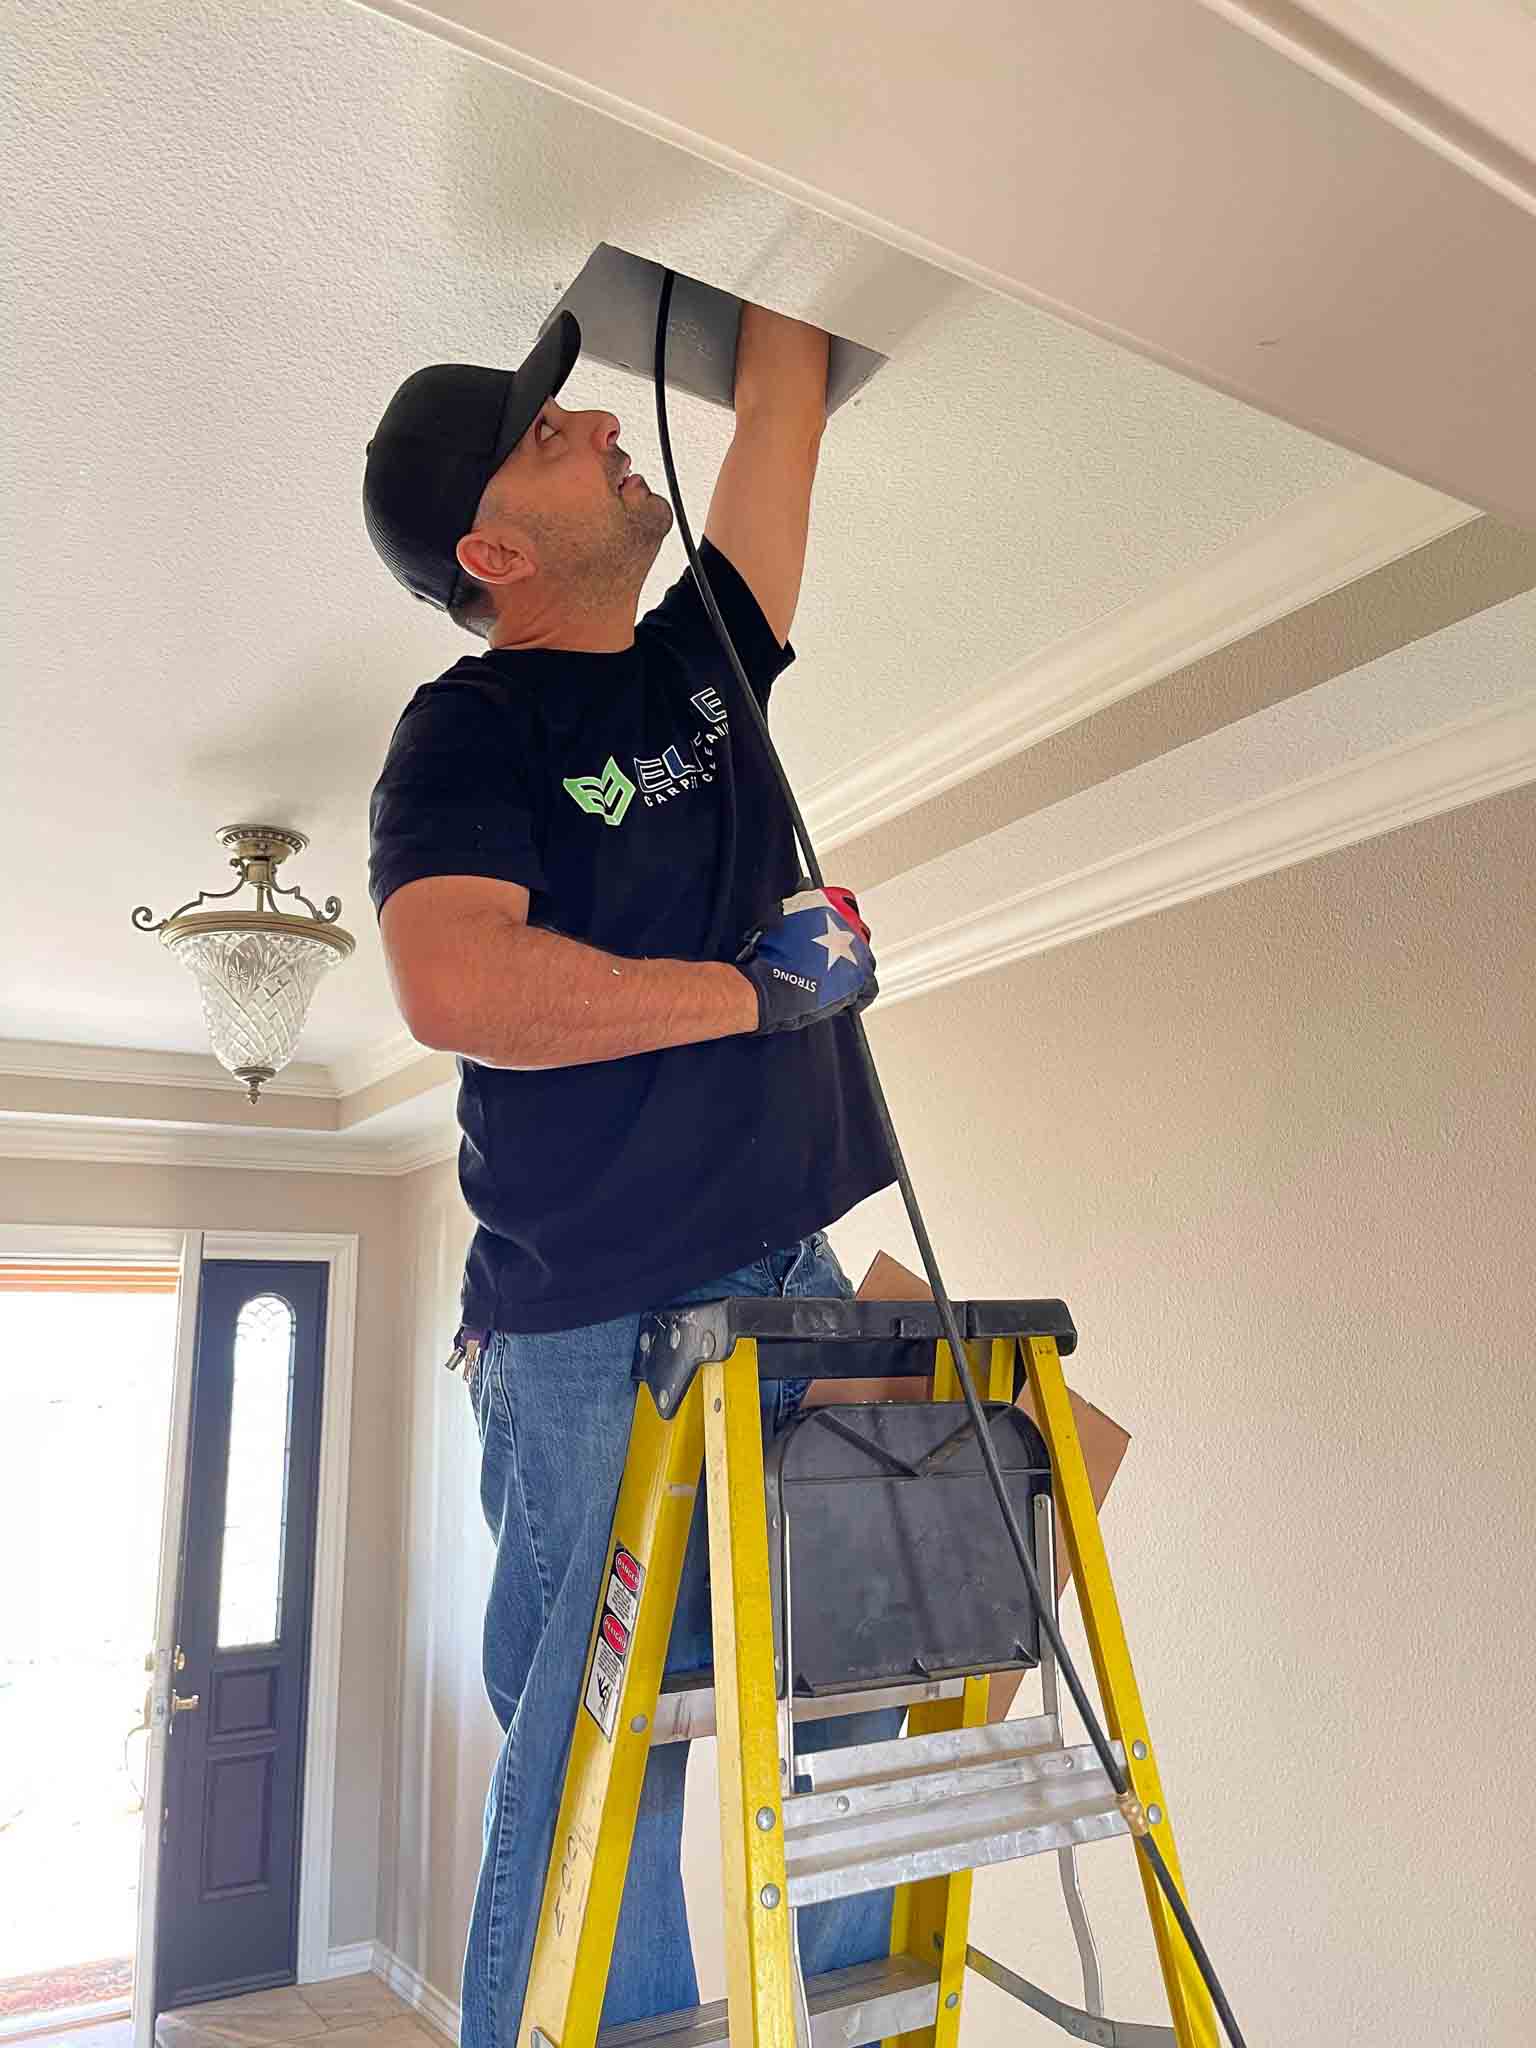 Air Duct being cleaned by Michael Mendoza of Elite Carpet Cleaning in Big Spring Tx 